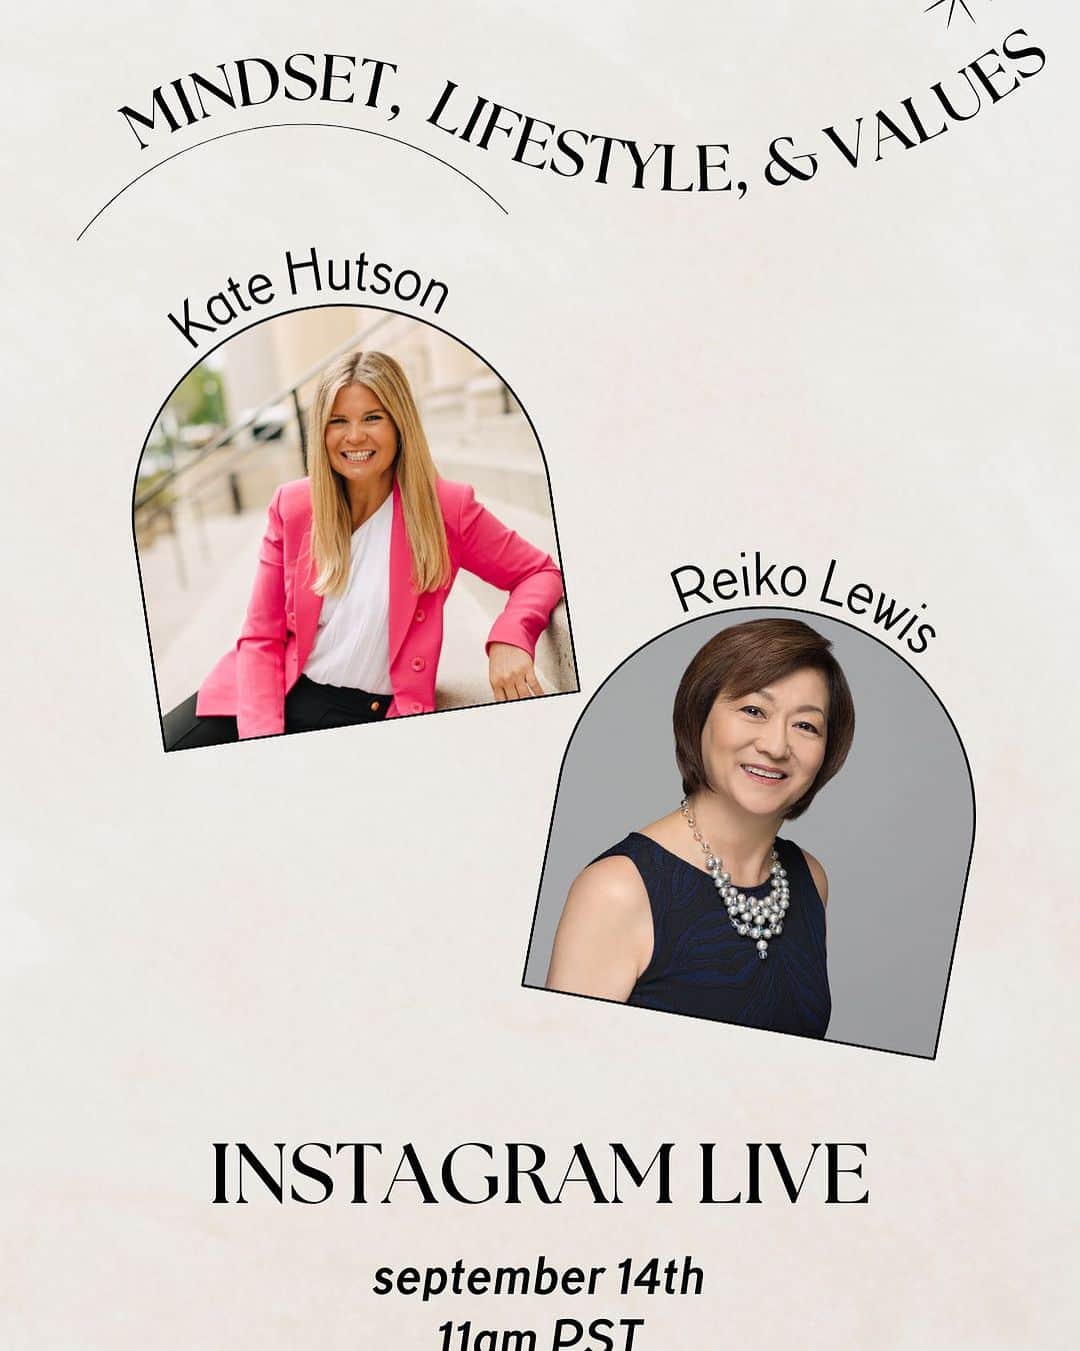 Reiko Lewisのインスタグラム：「Another Instagram live! With Kate Hudson, my life coach, we will talk about mindset as a leader, life style, and some important values in our life. Sept 14 1:00 pm PST  Sept 14 8:00 am Hawaii Time  @shattered.glass.coaching  @ventus_design_hawaii」